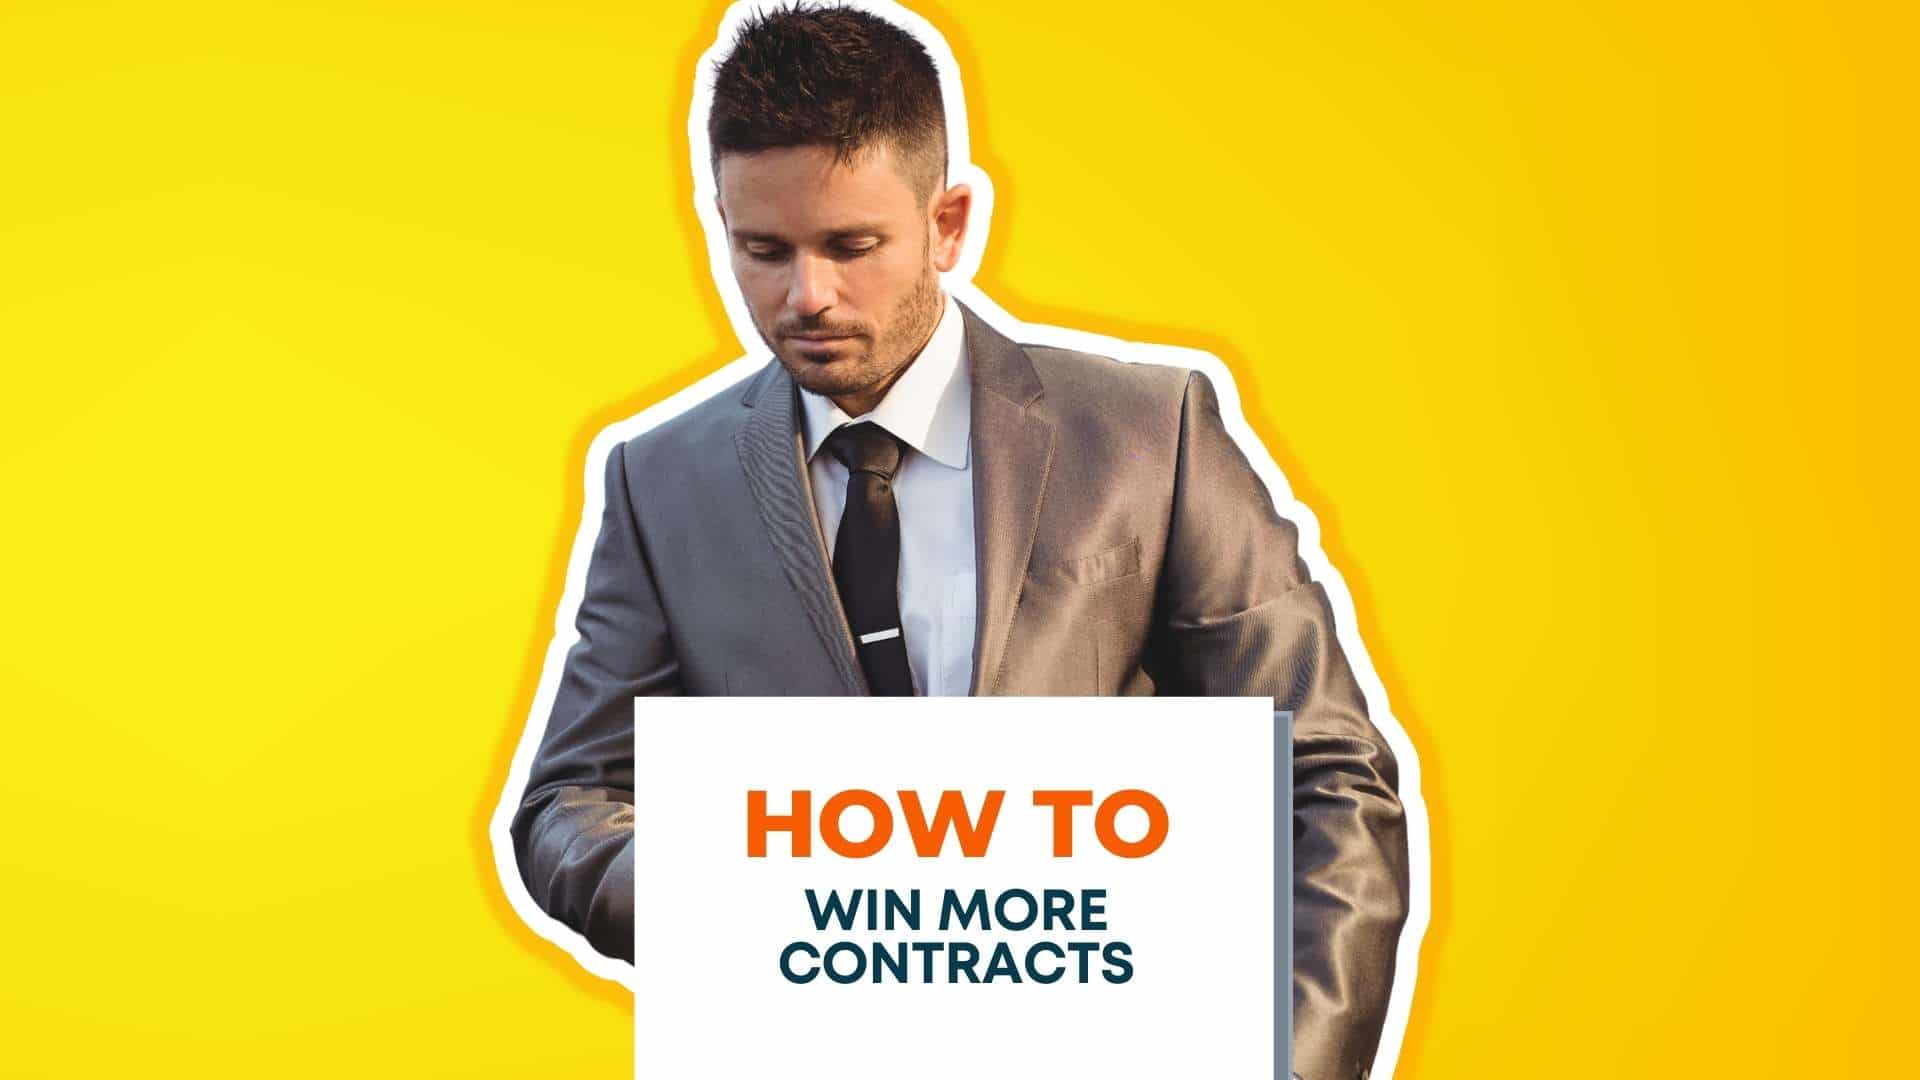 How To Win More Contracts